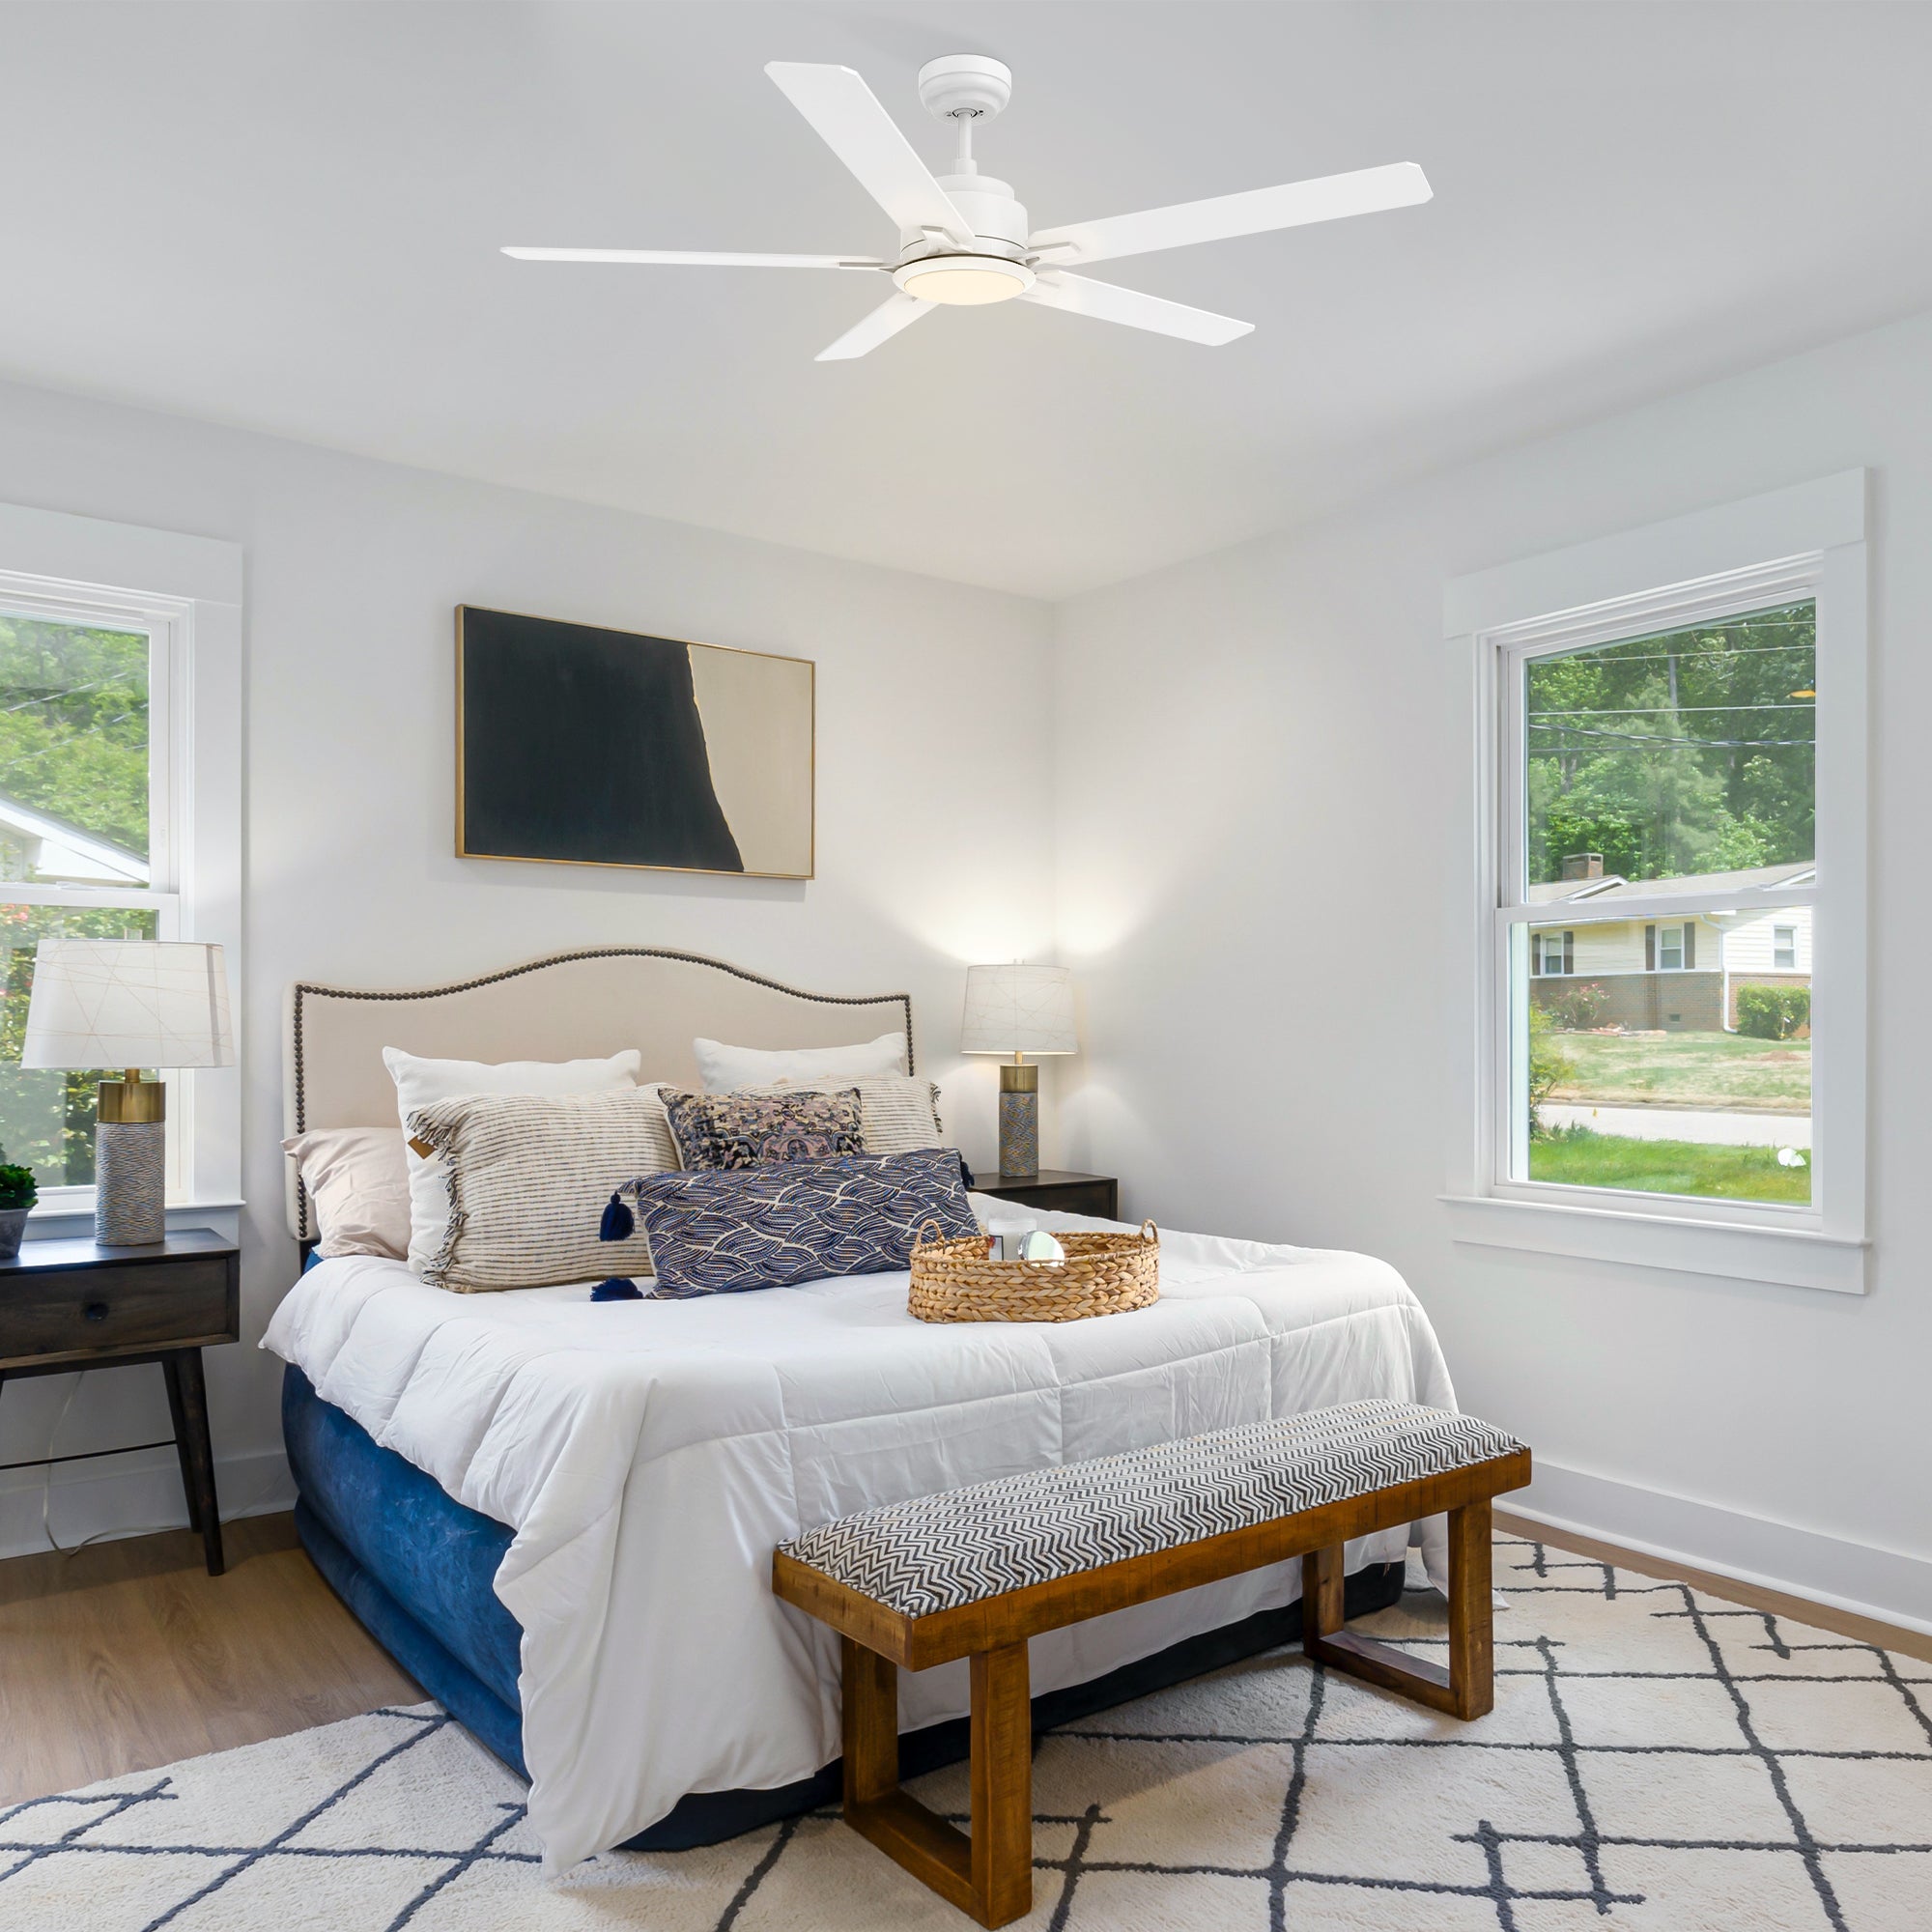 This Essex 56&#39;&#39; smart ceiling fan keeps your space cool, bright, and stylish. It is a soft modern masterpiece perfect for your large indoor living spaces. This Wifi smart ceiling fan is a simplicity designing with White finish, use elegant Plywood blades and has an integrated 4000K LED cool light. The fan features Remote control, Wi-Fi apps, Siri Shortcut and Voice control technology (compatible with Amazon Alexa and Google Home Assistant ) to set fan preferences.